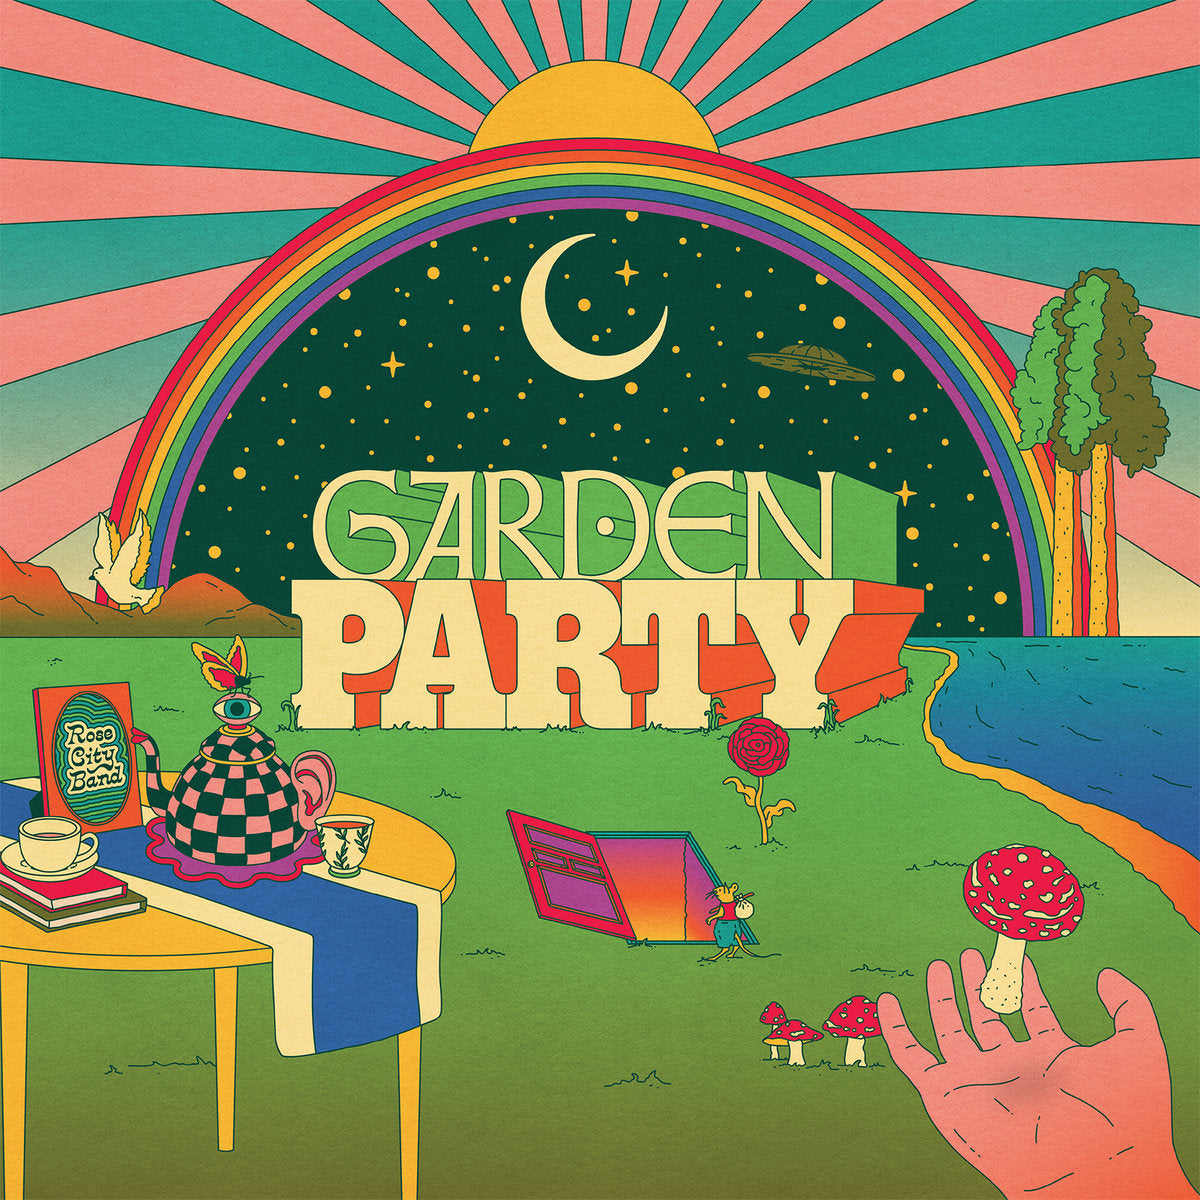 Rose City Band "Garden Party" [Indie Exclusive Clear/Purple Vinyl]